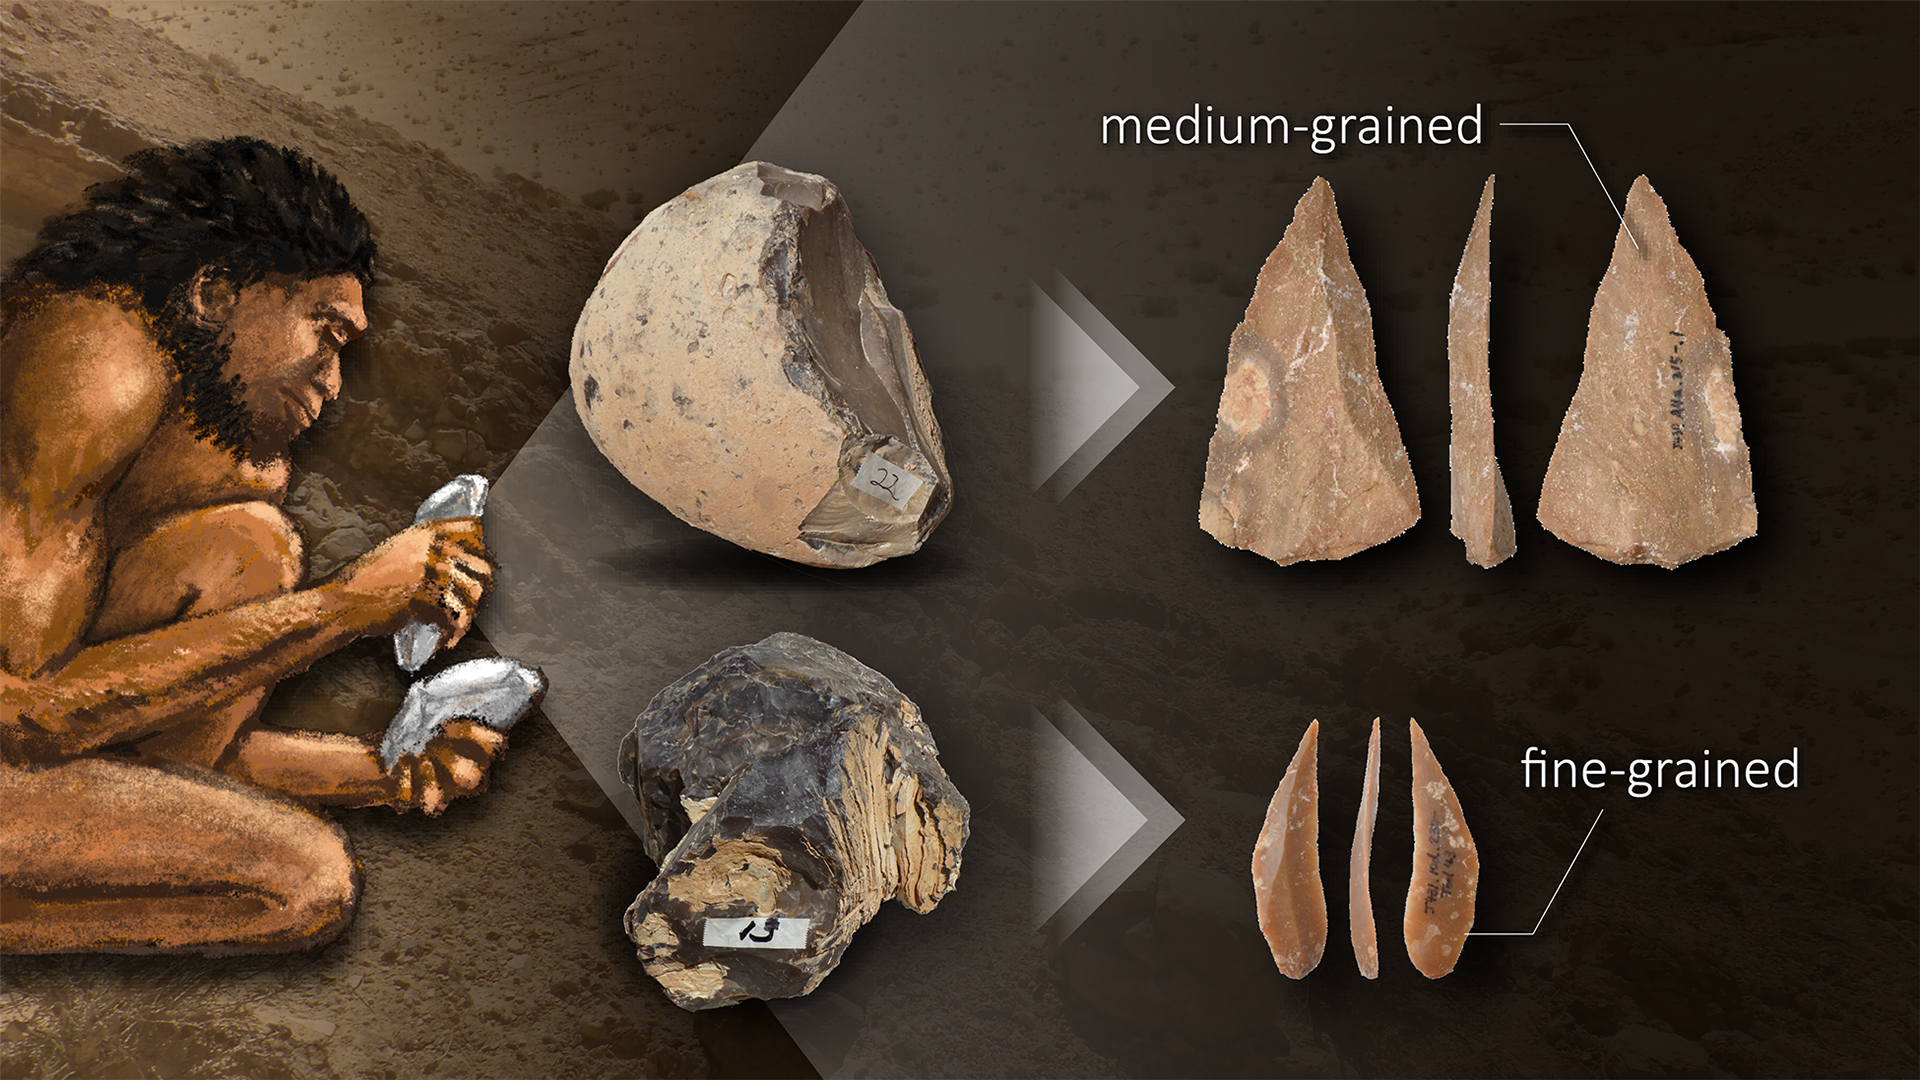 The Unexpected Technical Skills of Early Human Toolmakers